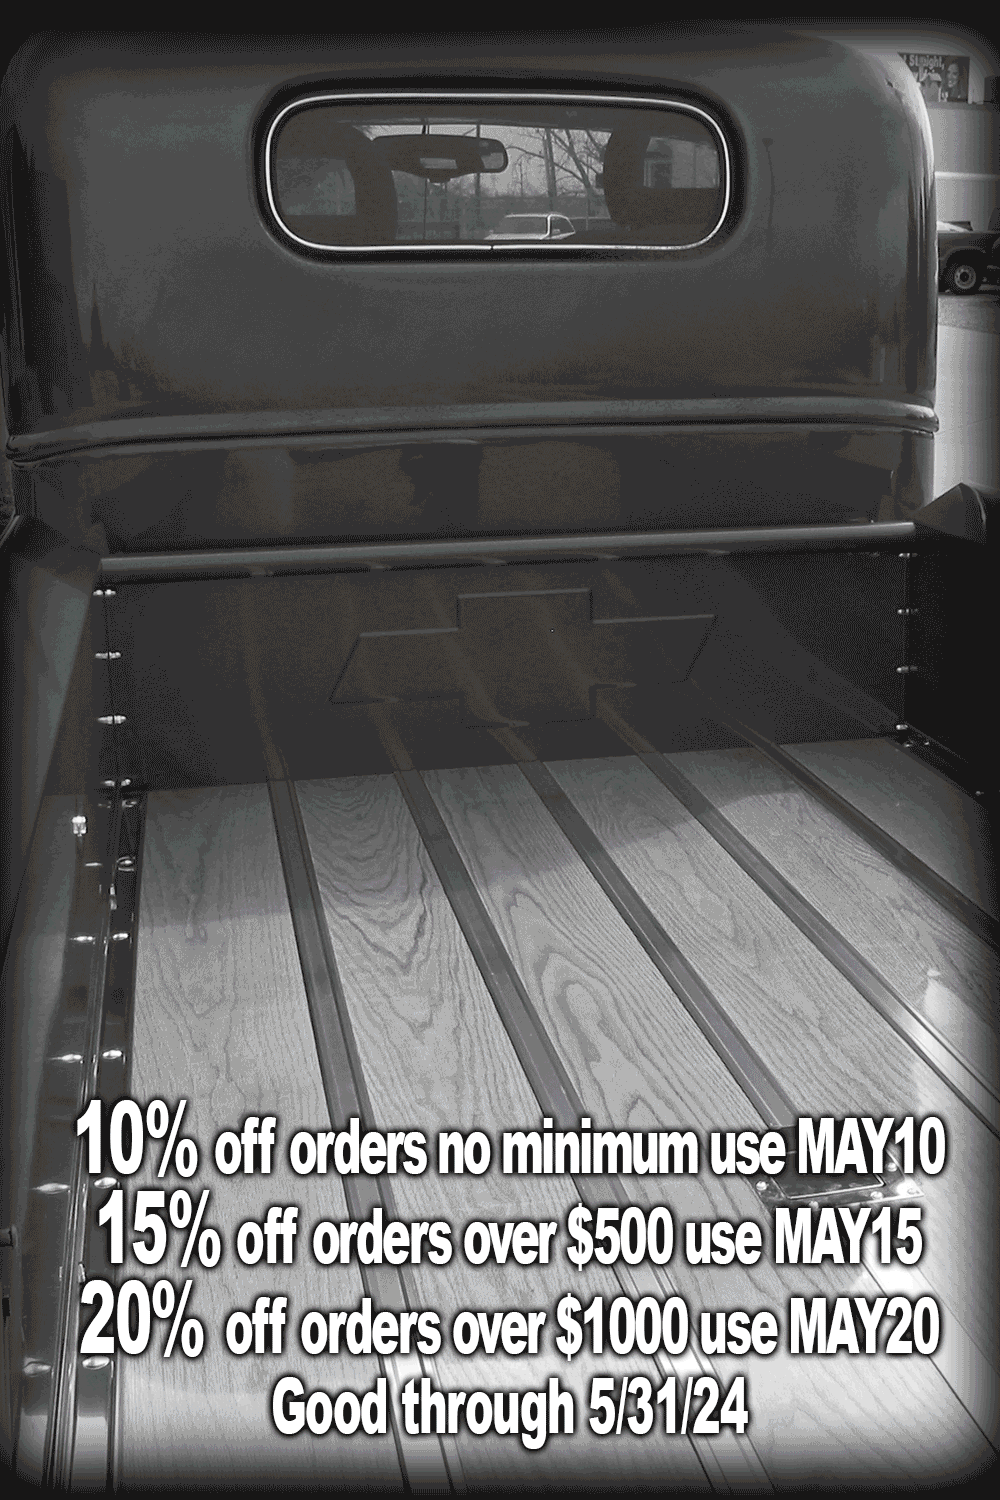 Get 10%, 15% and even 20% off on USA Made parts through 5/31/24